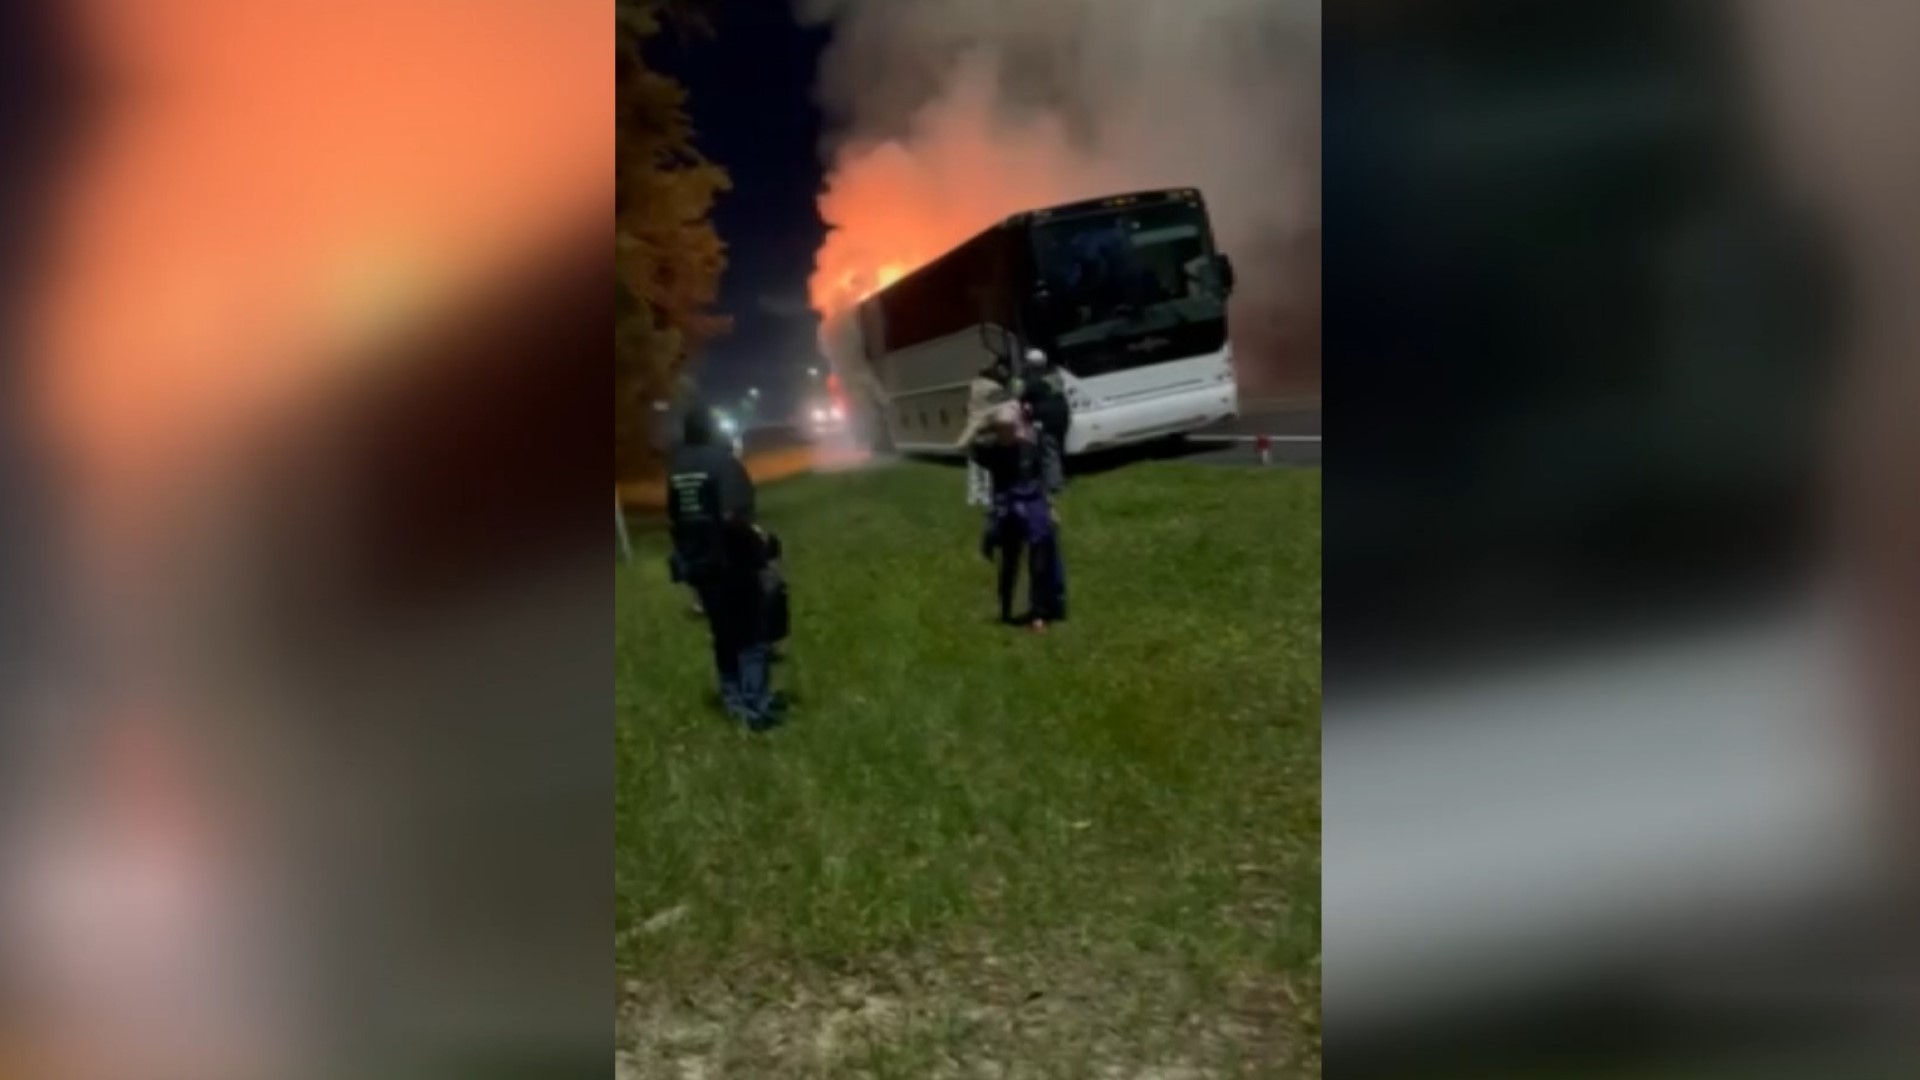 The bus caught on fire along Interstate 10 in Baker County Friday morning, as a passenger tells First Coast News a rear tire blew out and a spark caused the fire.